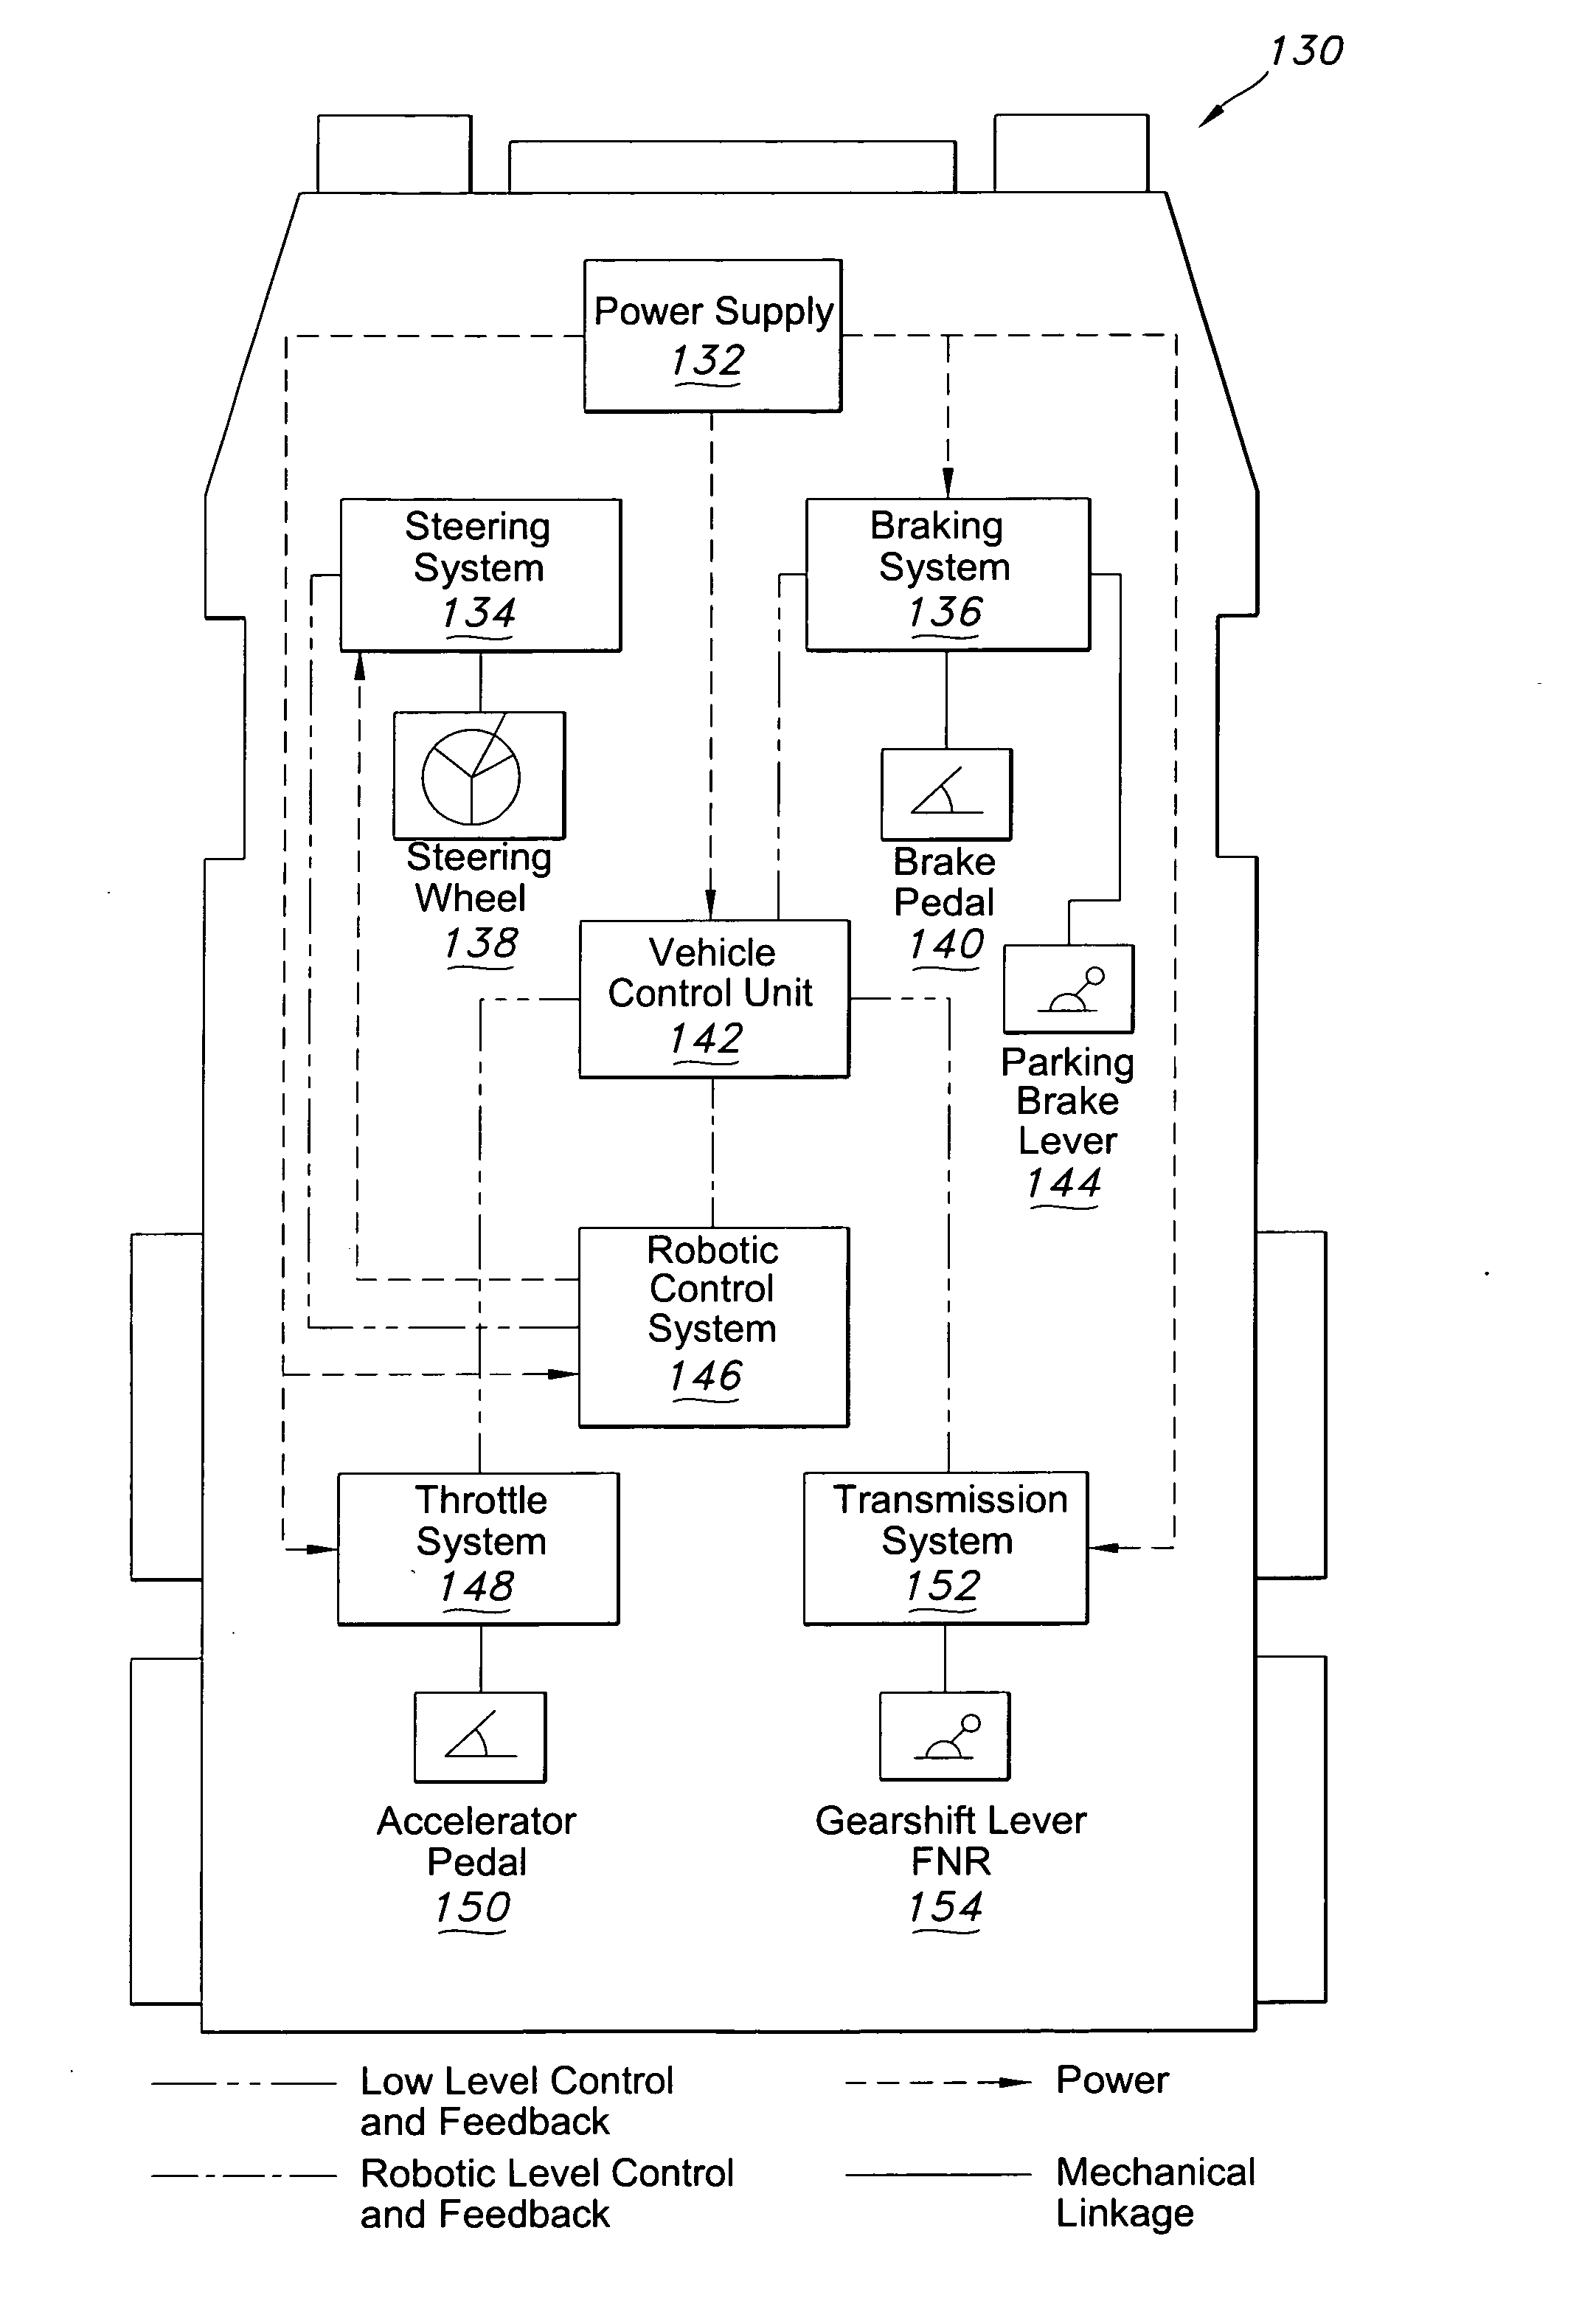 Systems and methods for switching between autonomous and manual operation of a vehicle